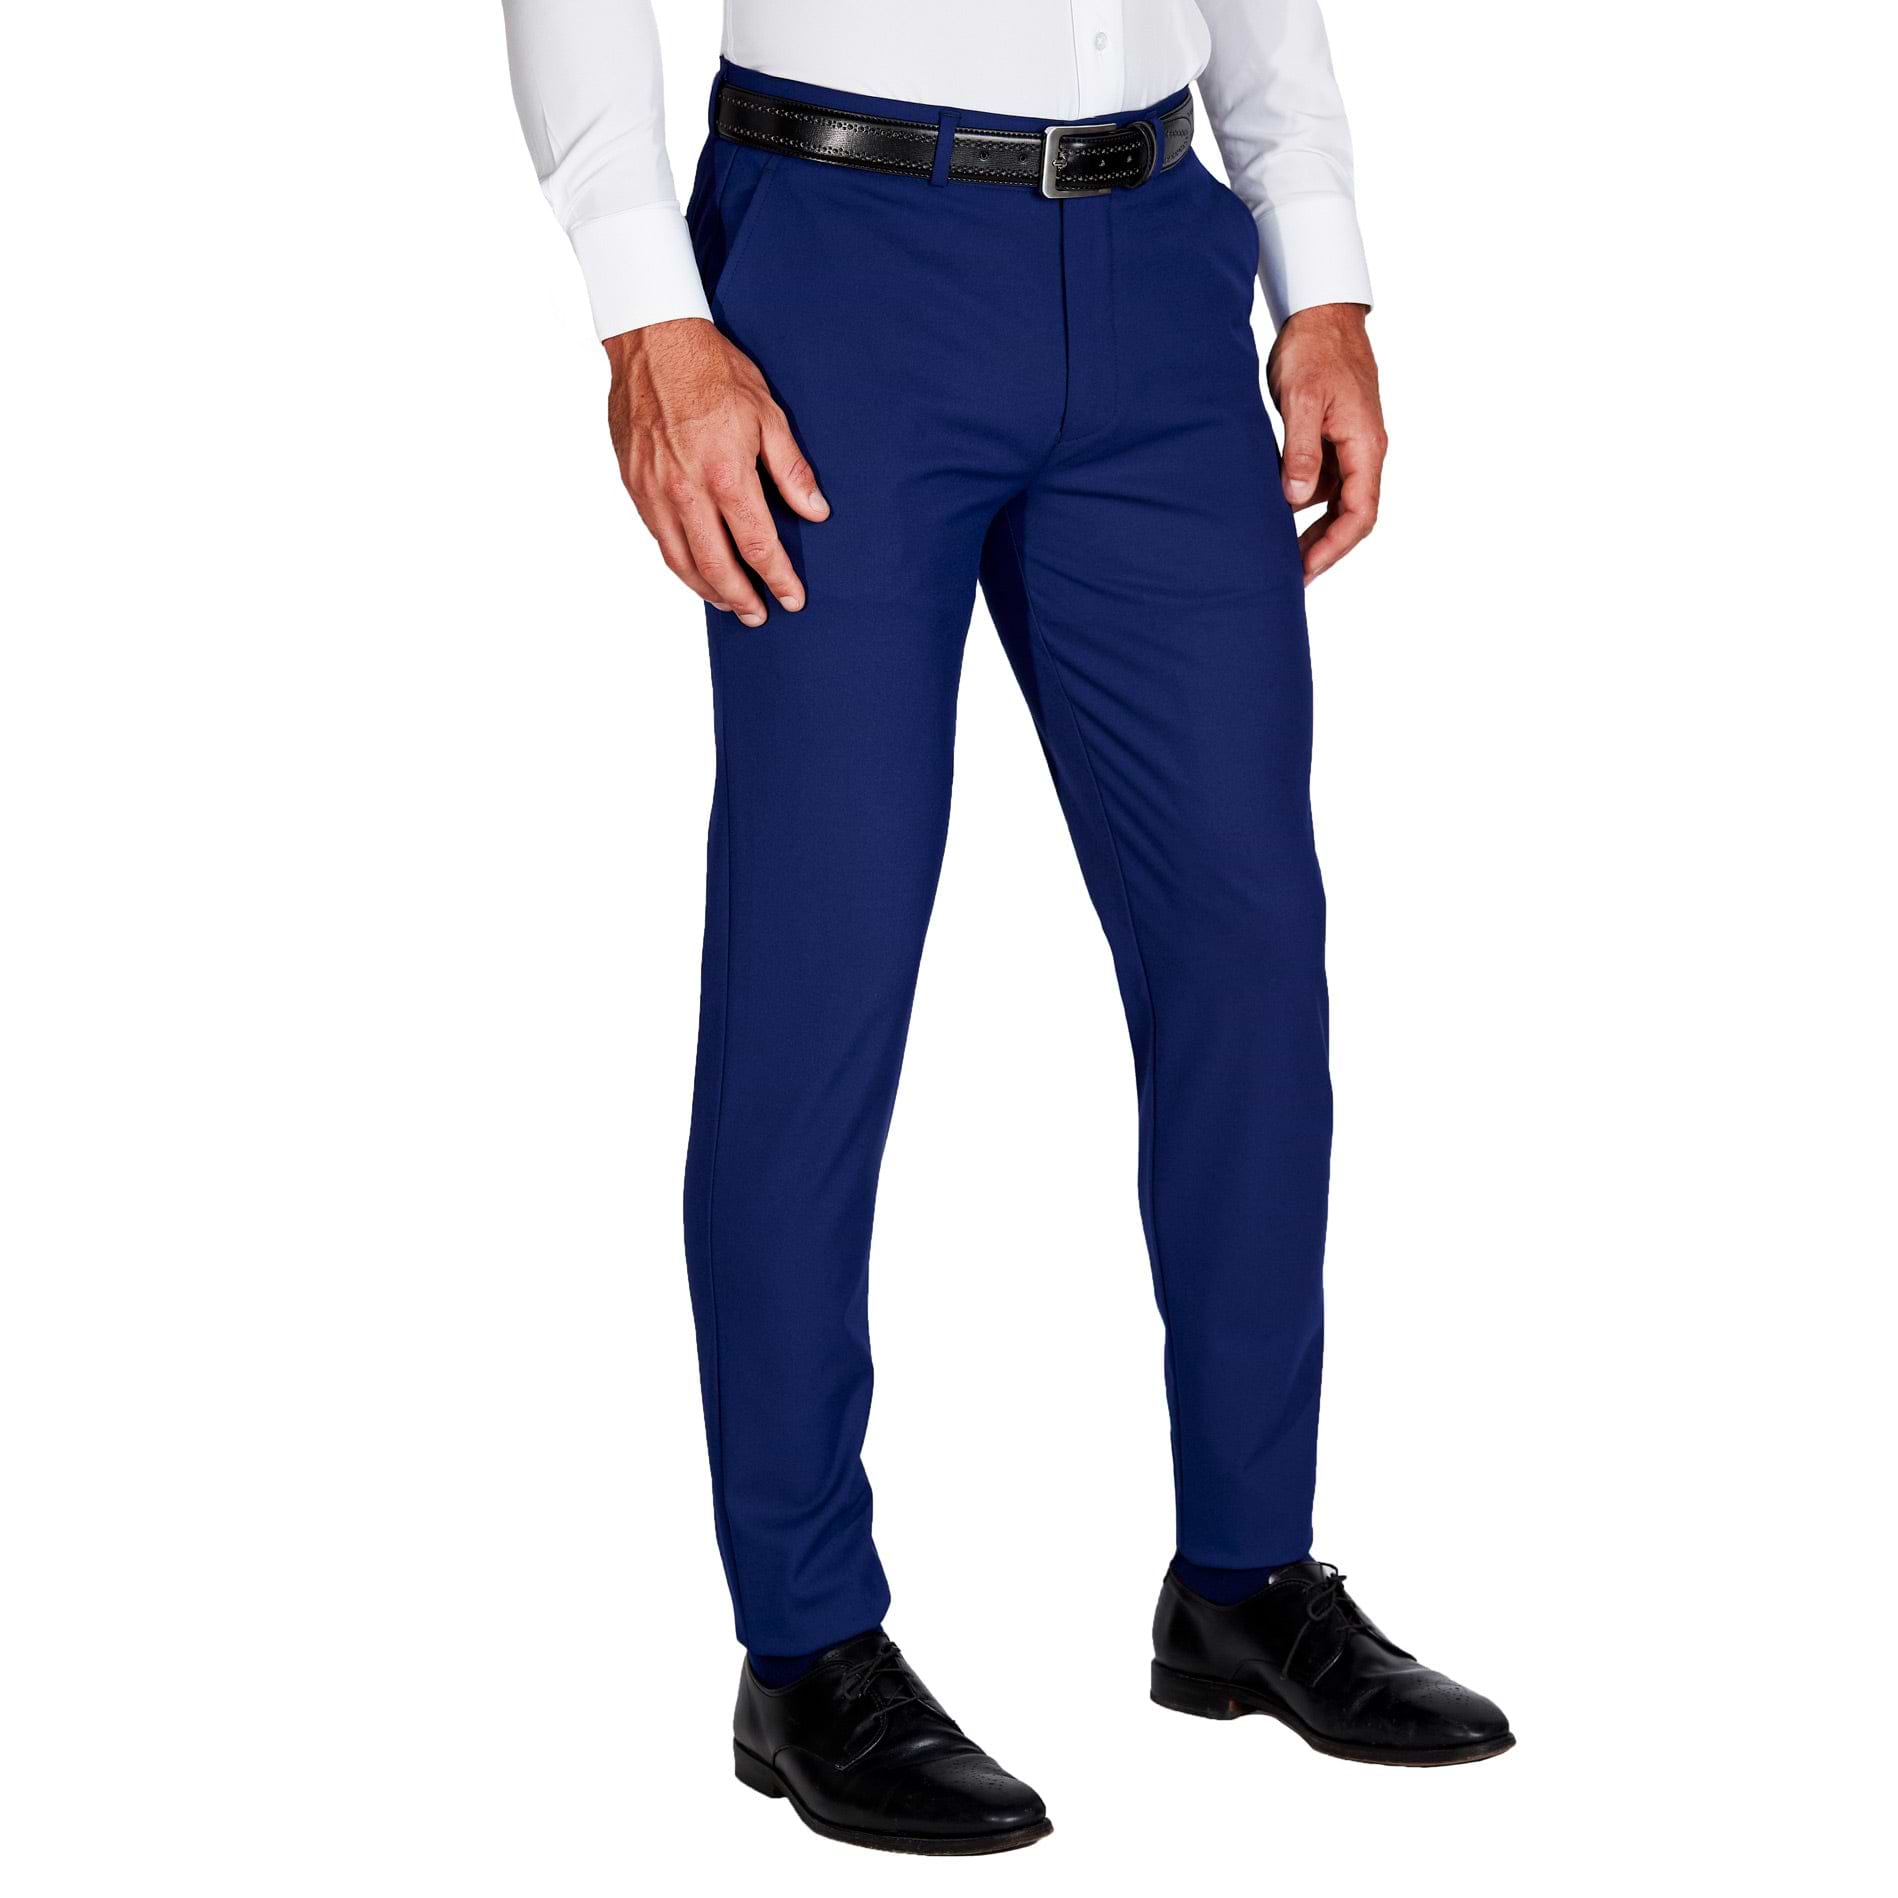 Lycra Stretchable Formal Pants for Men | Stylish Slim Fit Men's Wear  Trousers for Office or Party | Mens Fashion Dress Trouser Pant